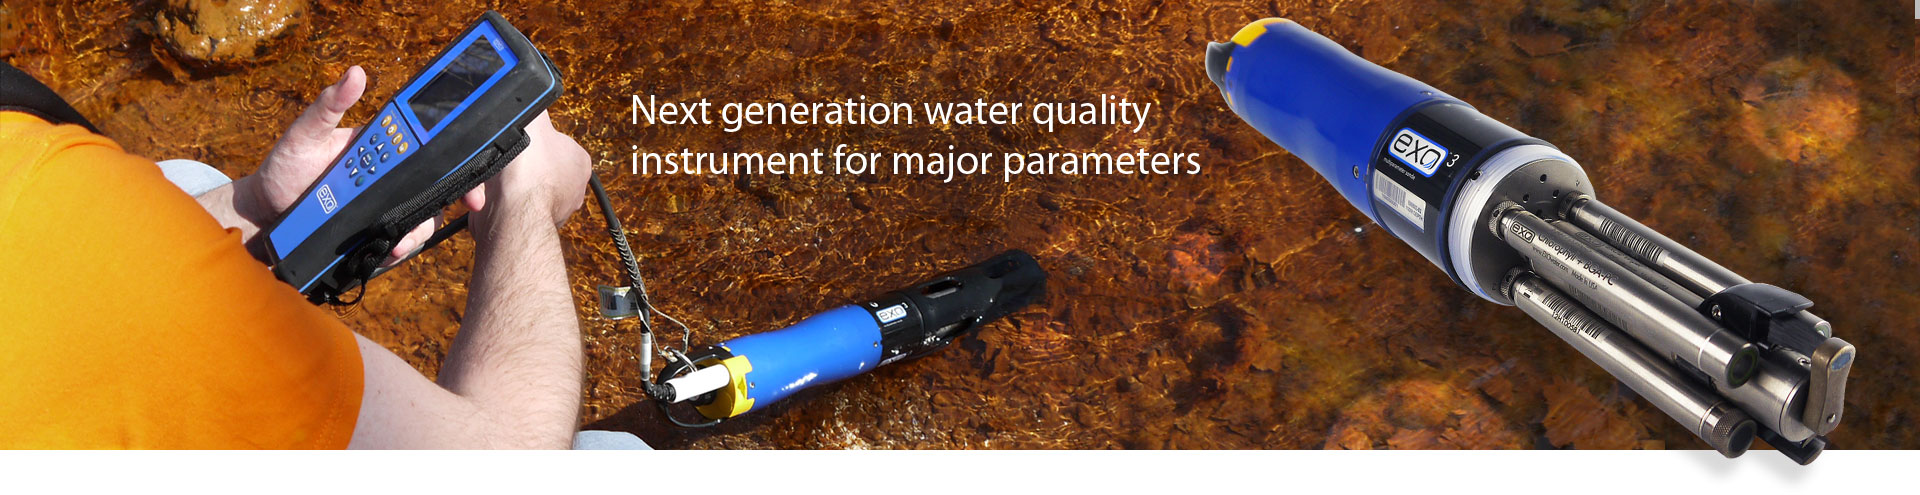 Next generation water quality instrument for major parameters